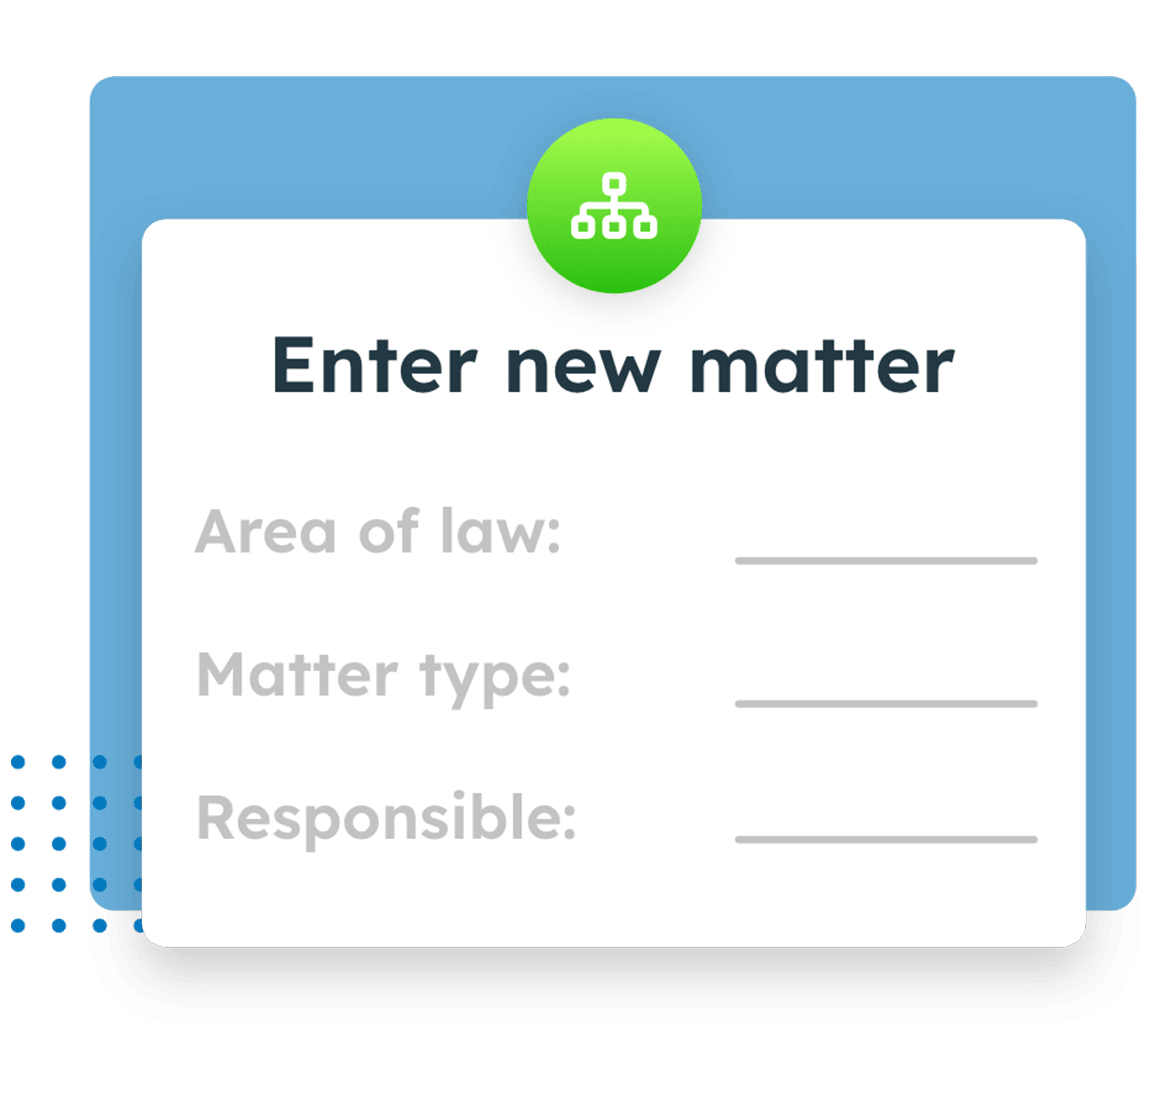 Enter a new matter LeanLaw capability.